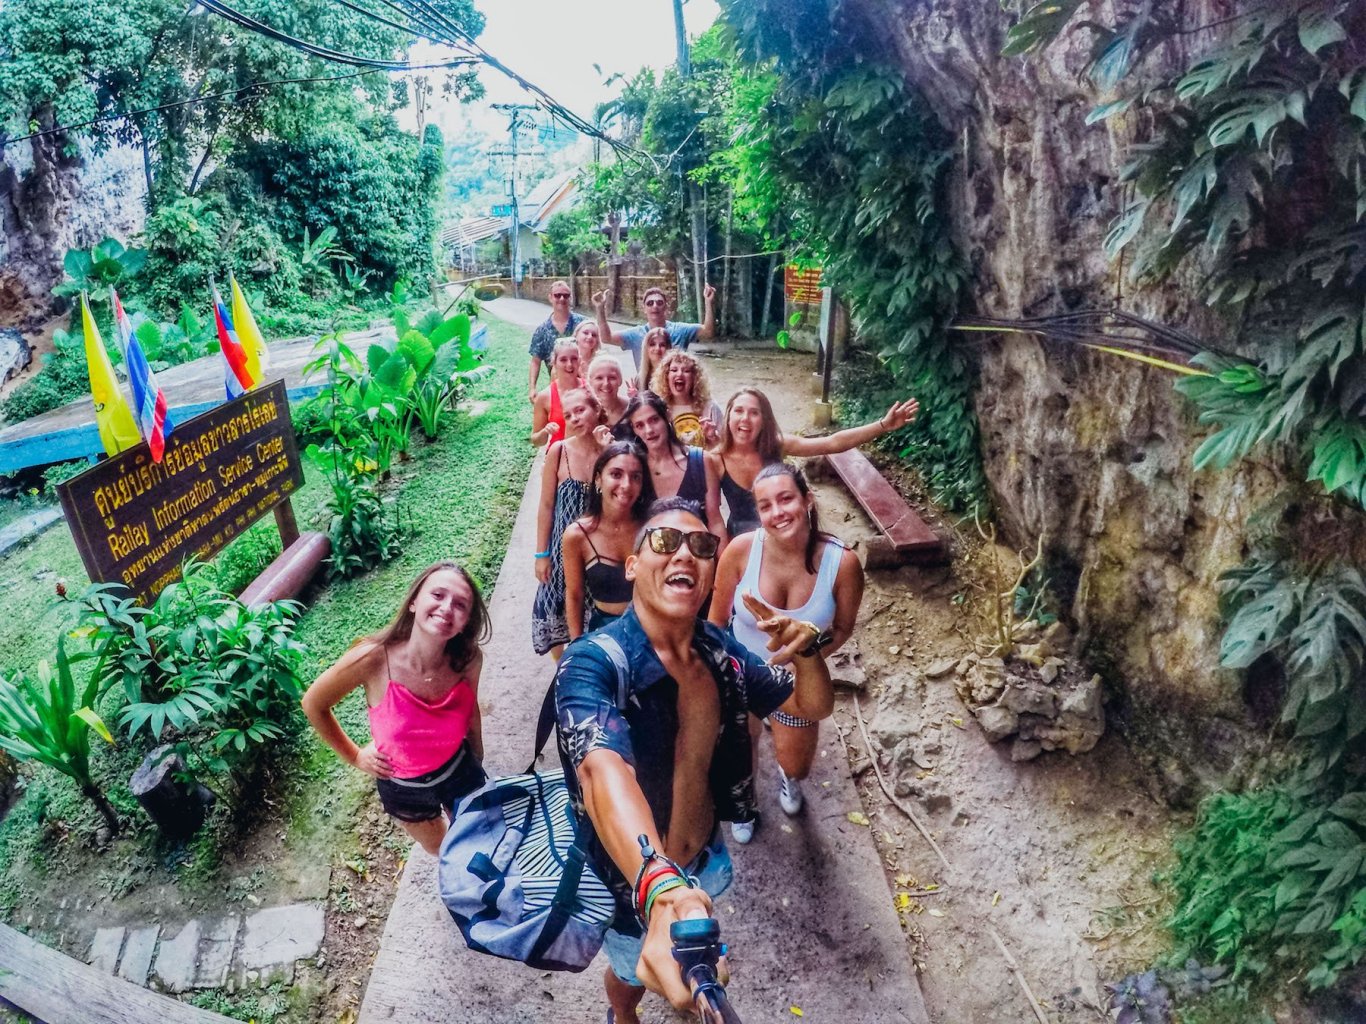 A group selfie at Railay beach before going kayaking in Krabi Thailand